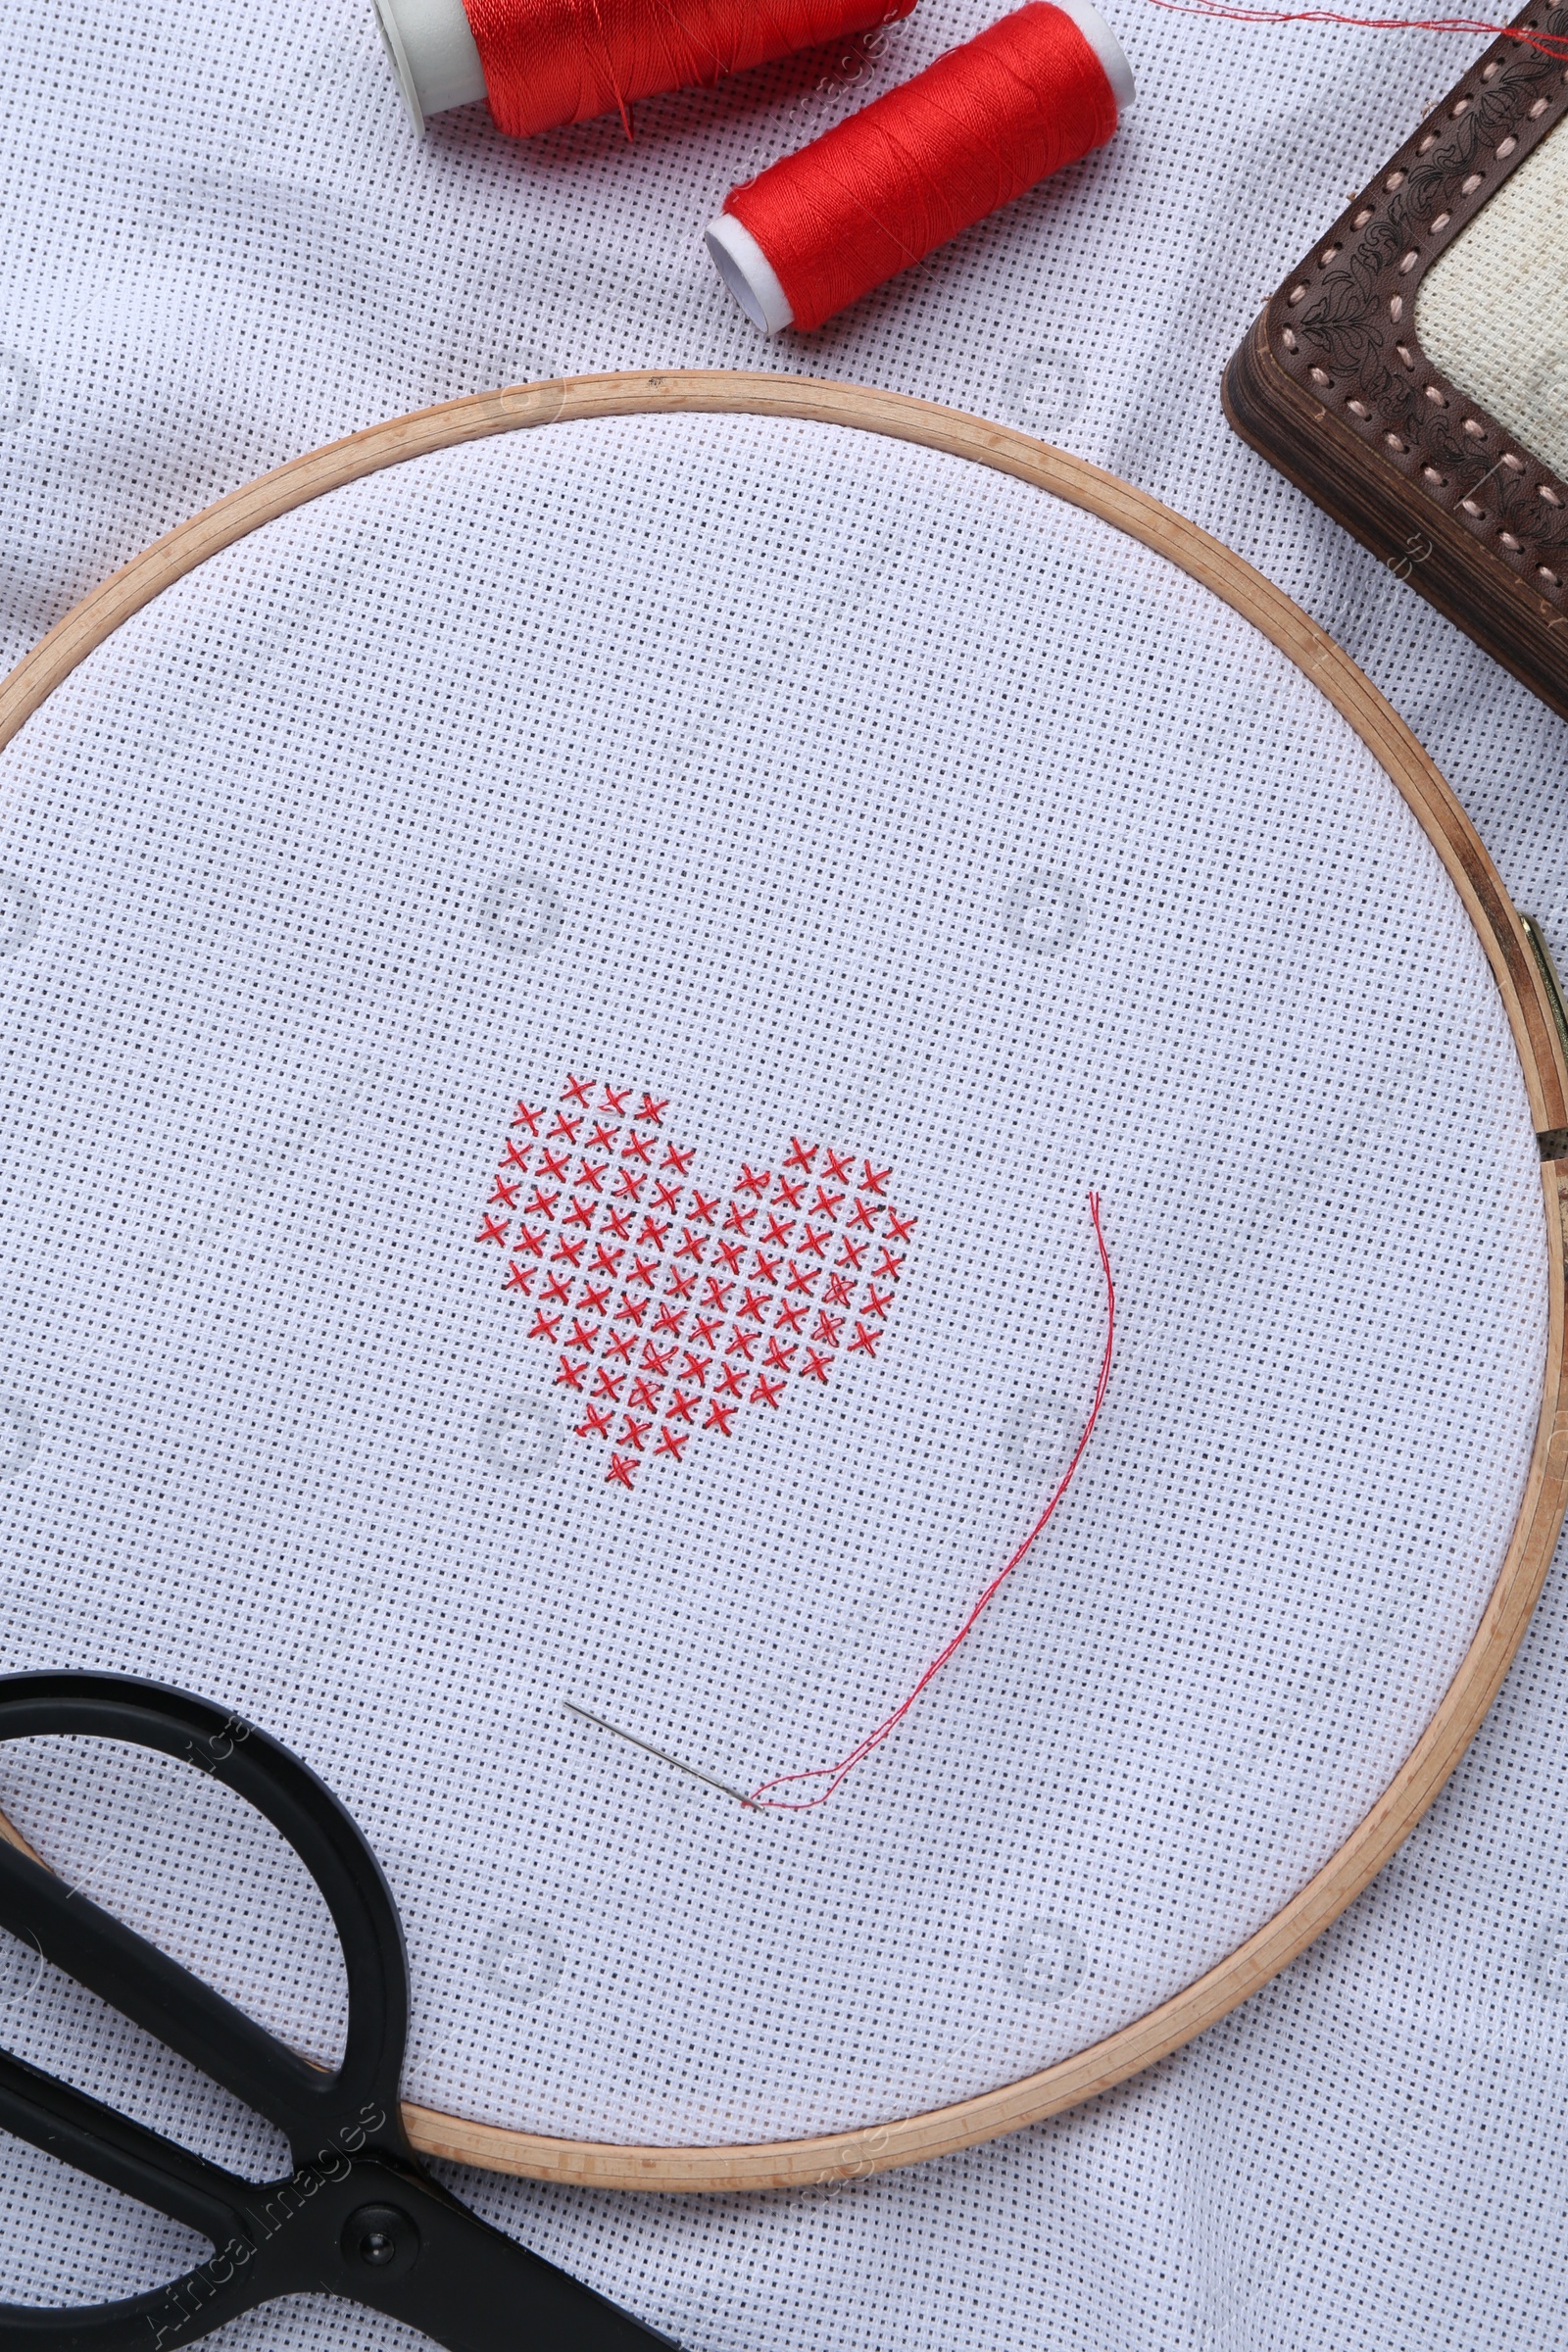 Photo of Embroidered red heart, needle and scissors on white cloth, top view